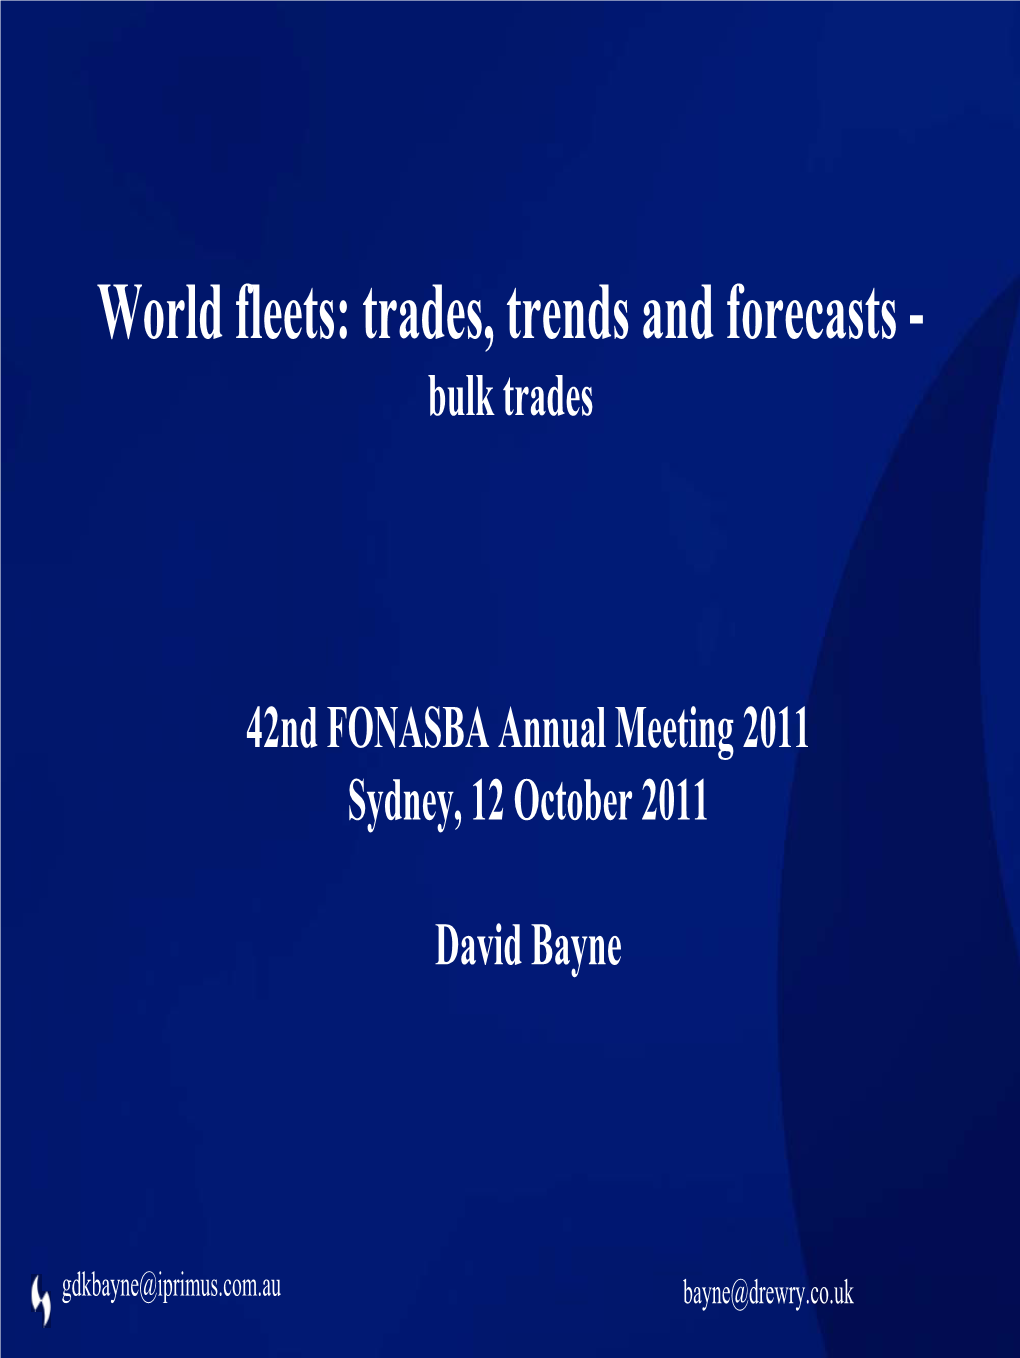 World Fleets: Trades, Trends and Forecasts - Bulk Trades